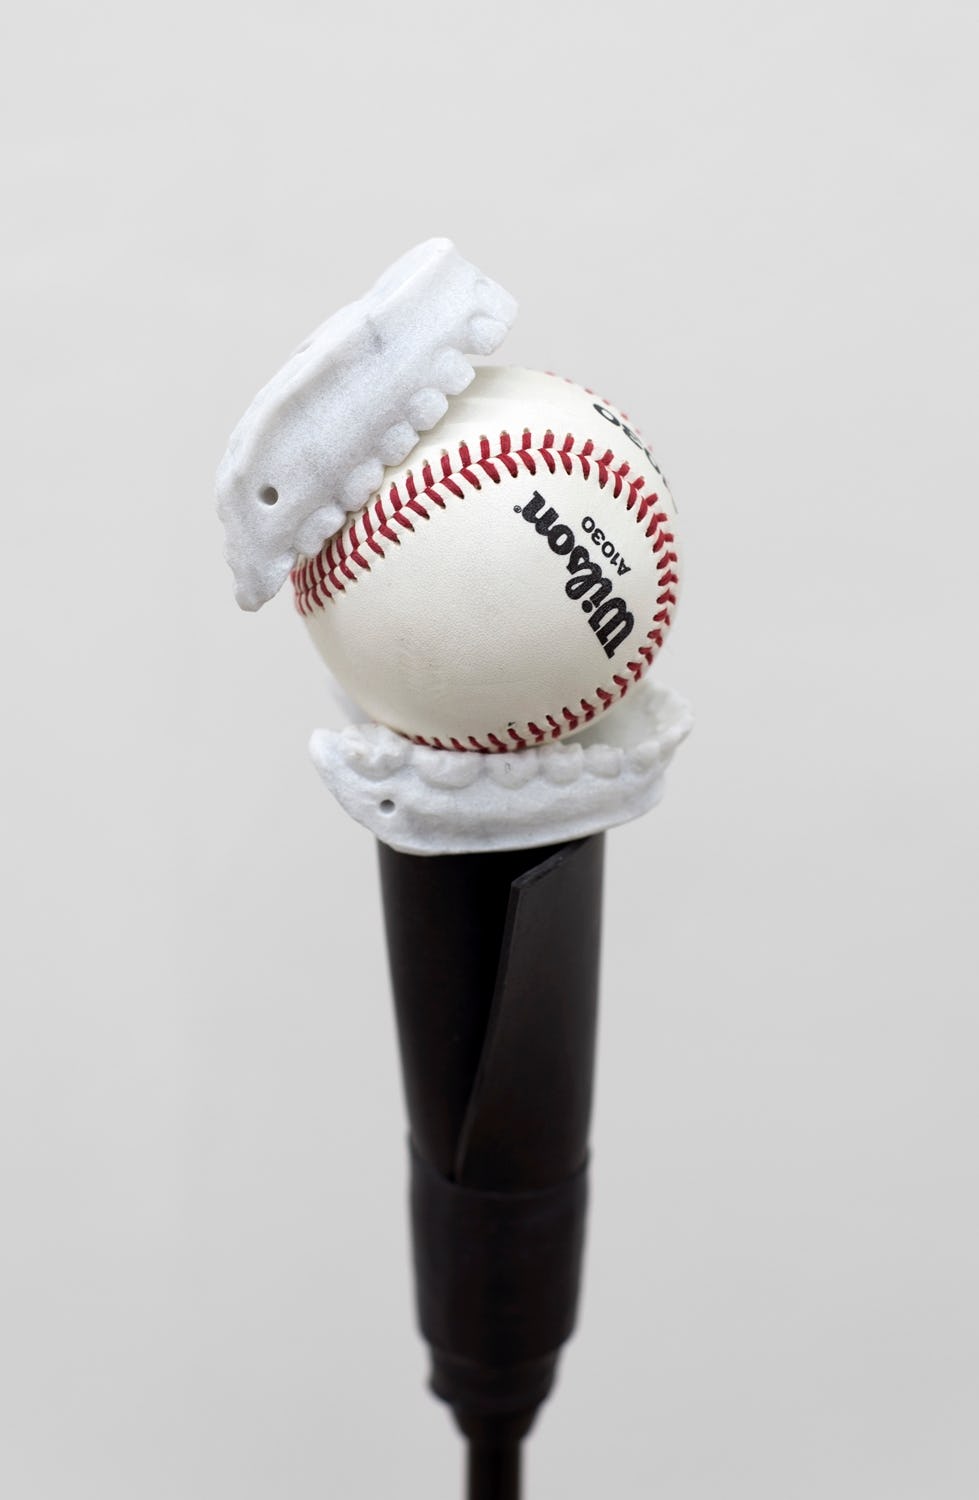 The Last Stage of Love (2017)
Hand-carved Carrara marble, baseball, batting tee
